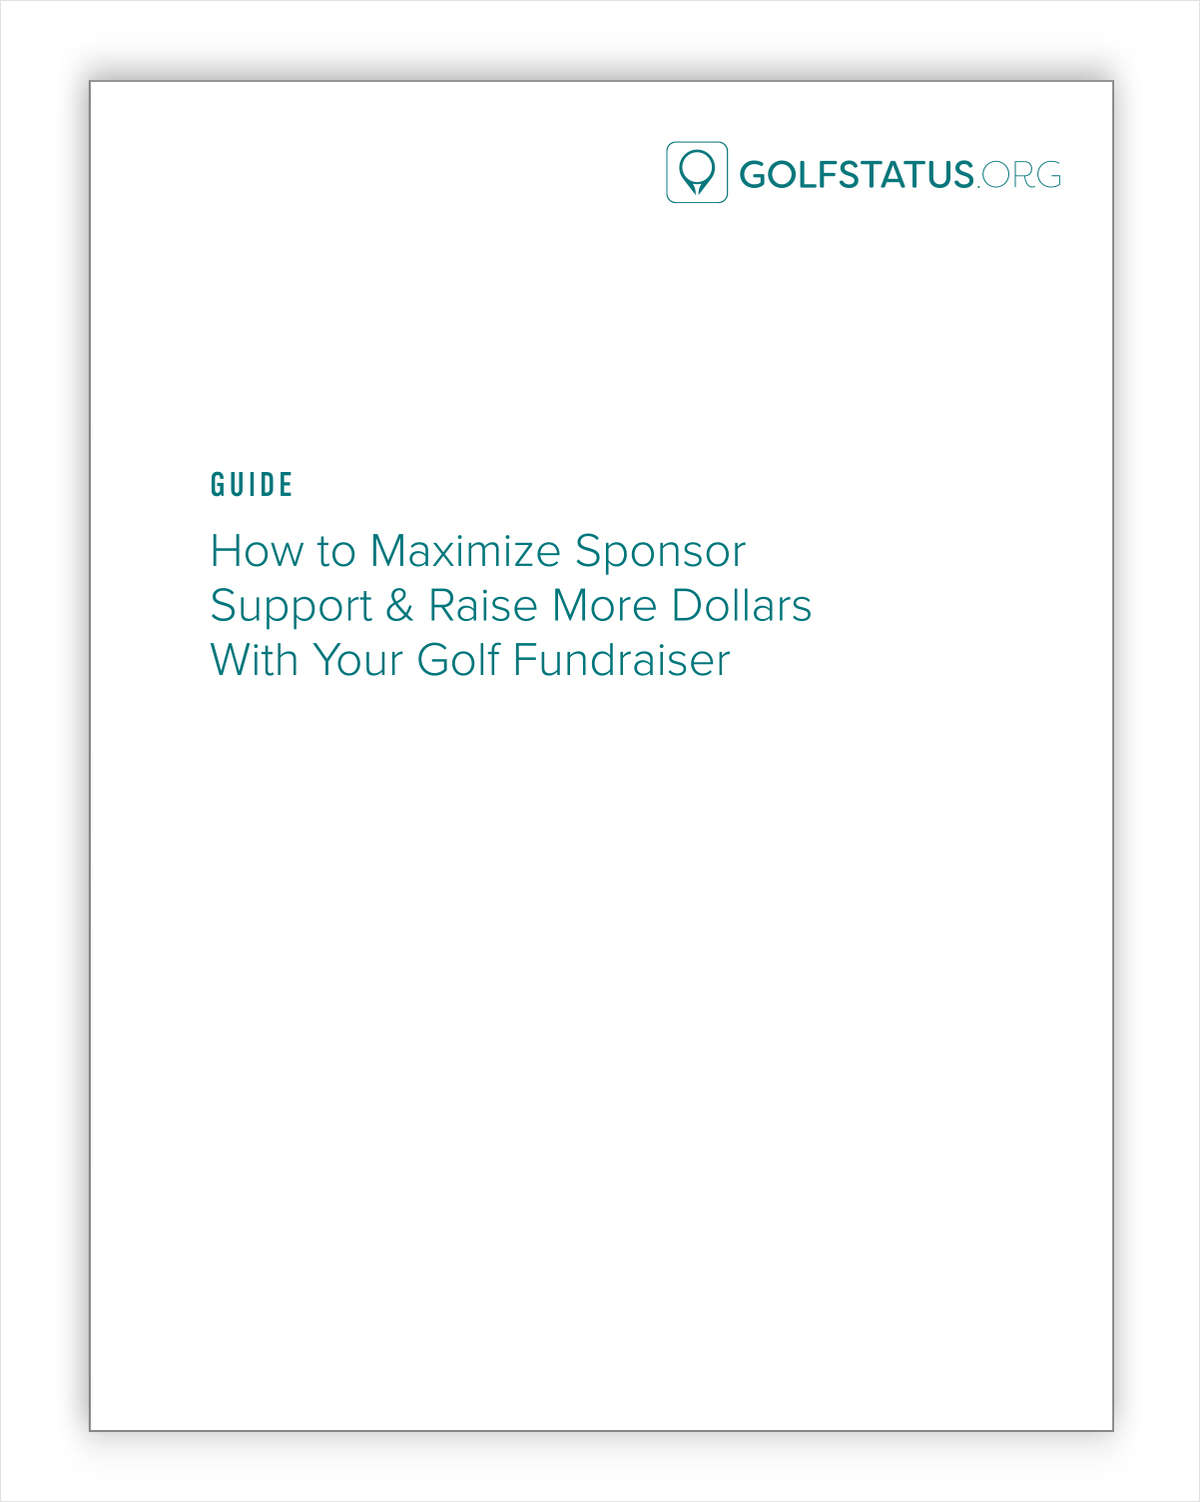 Guide: How to Maximize Sponsor Support & Raise More Dollars From Your Golf Fundraiser